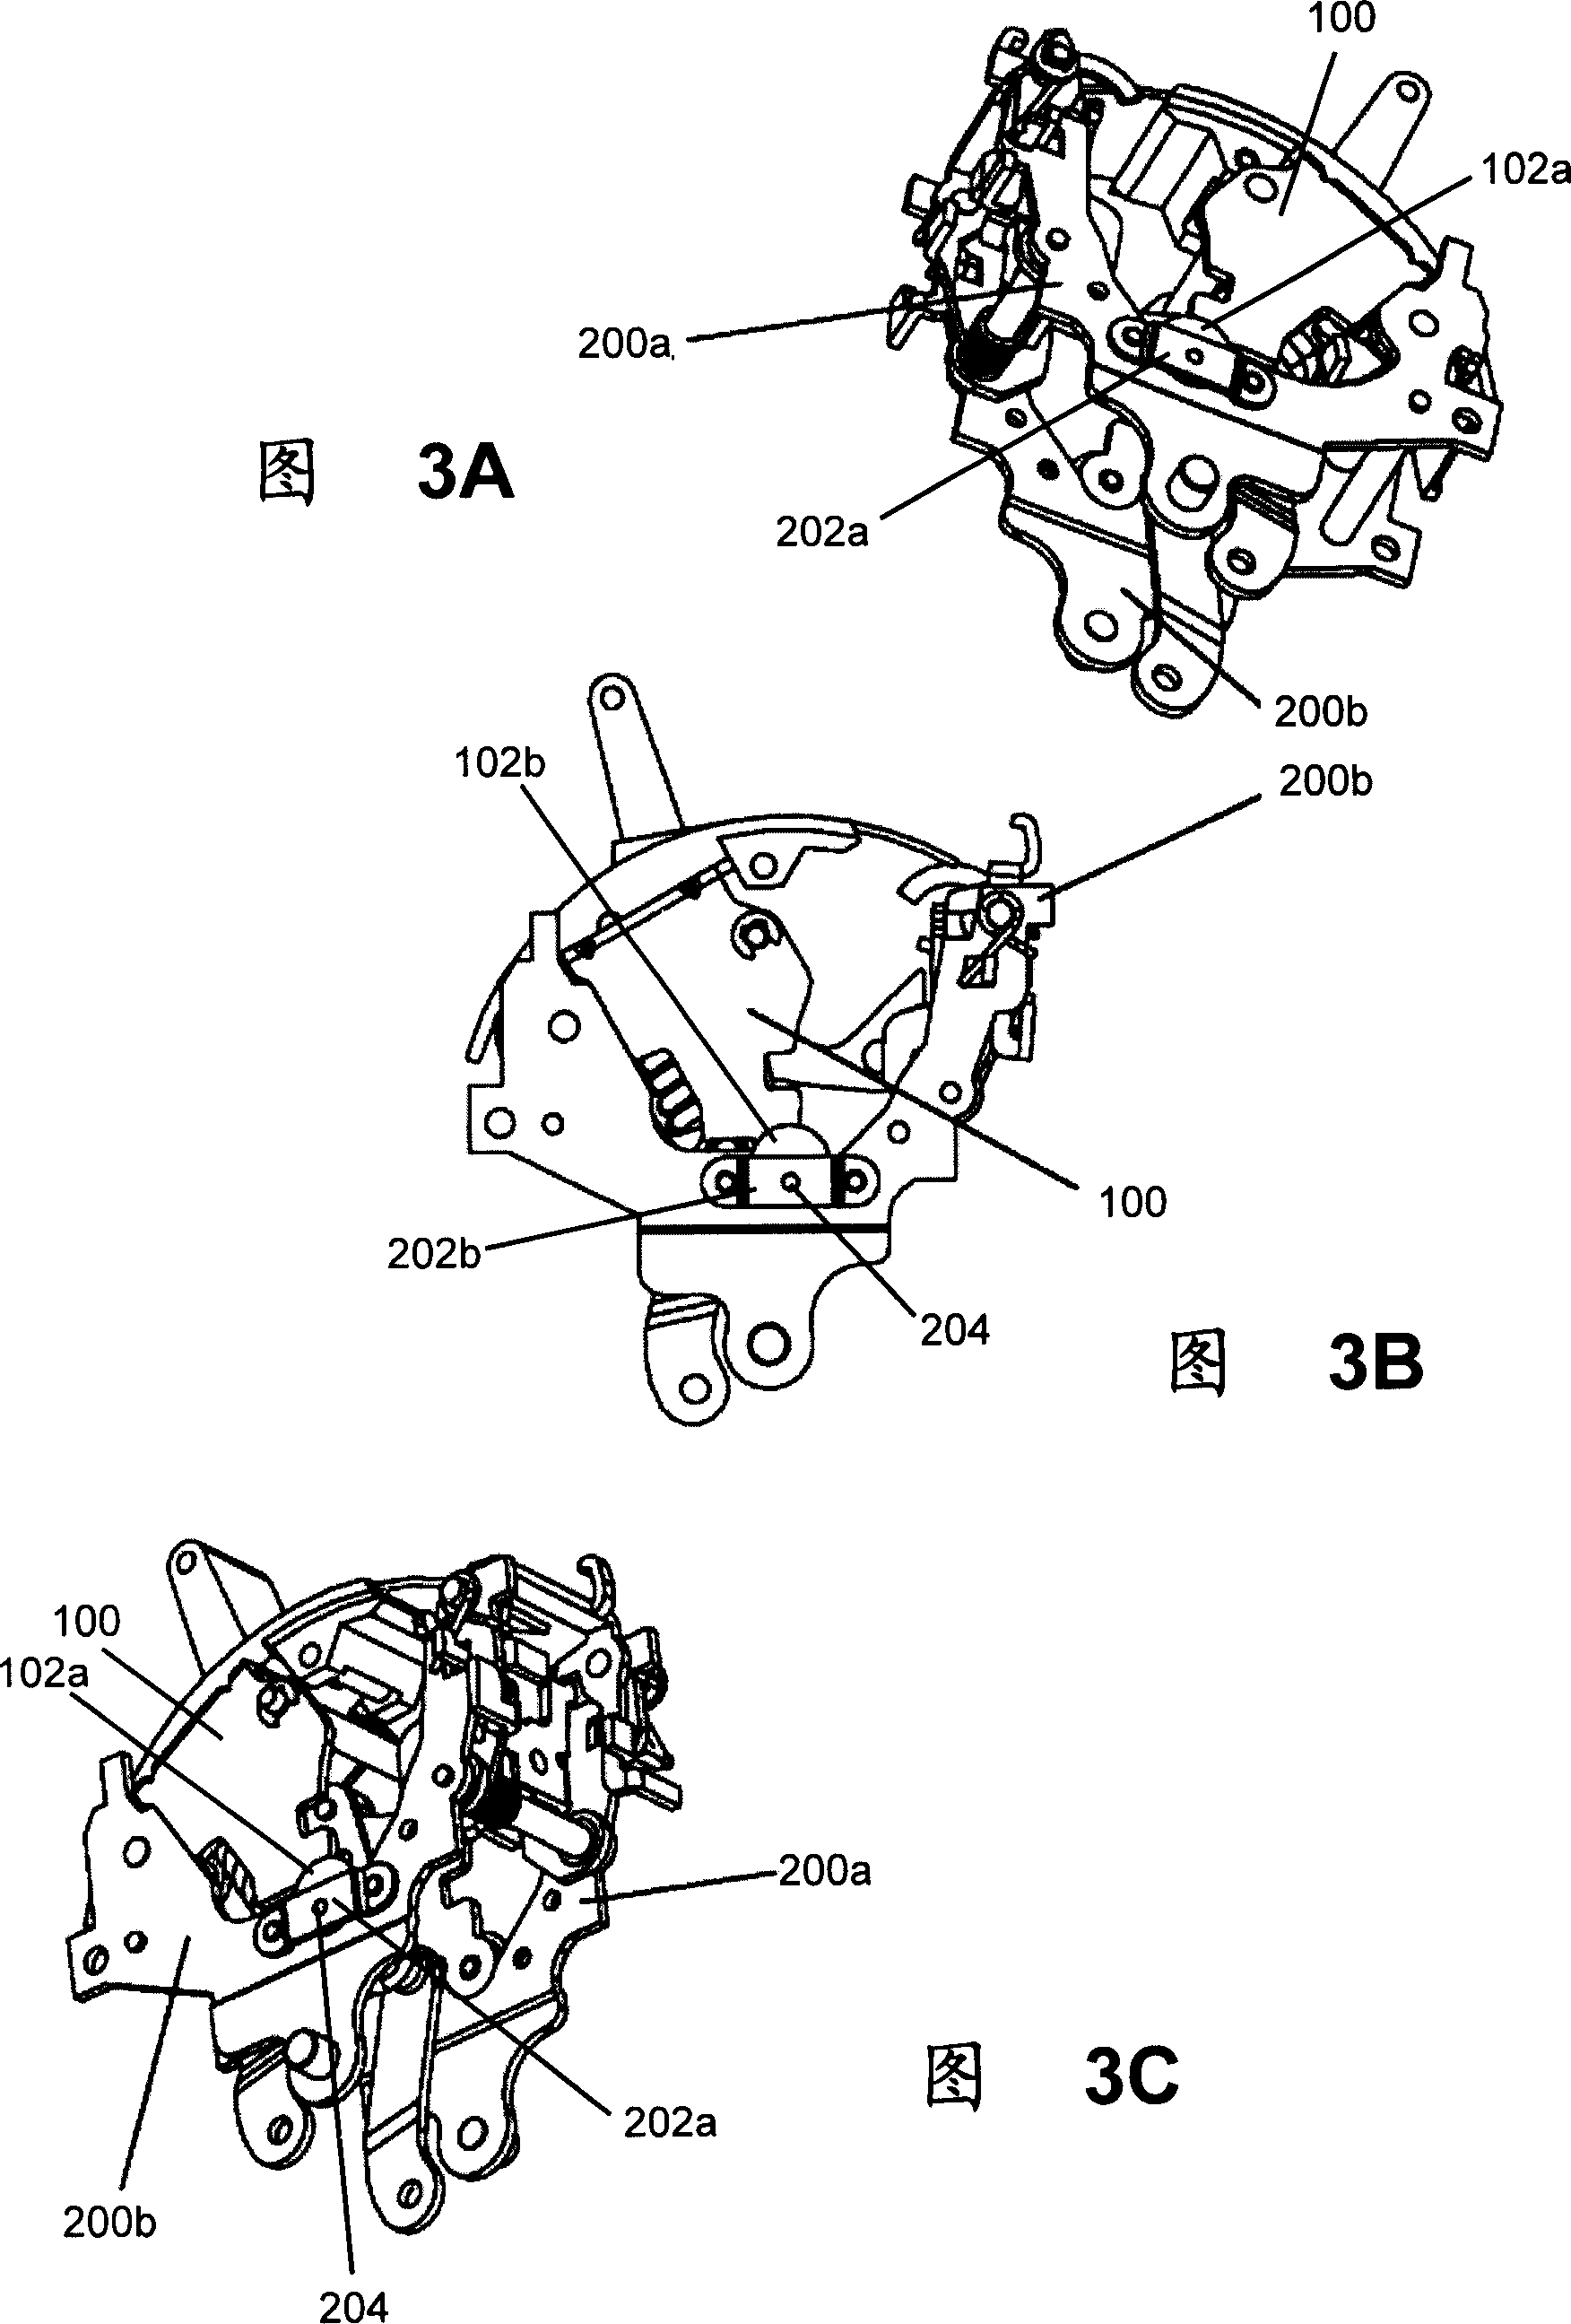 Circuit breaker actuating mechanism and its lever anti-slip structure